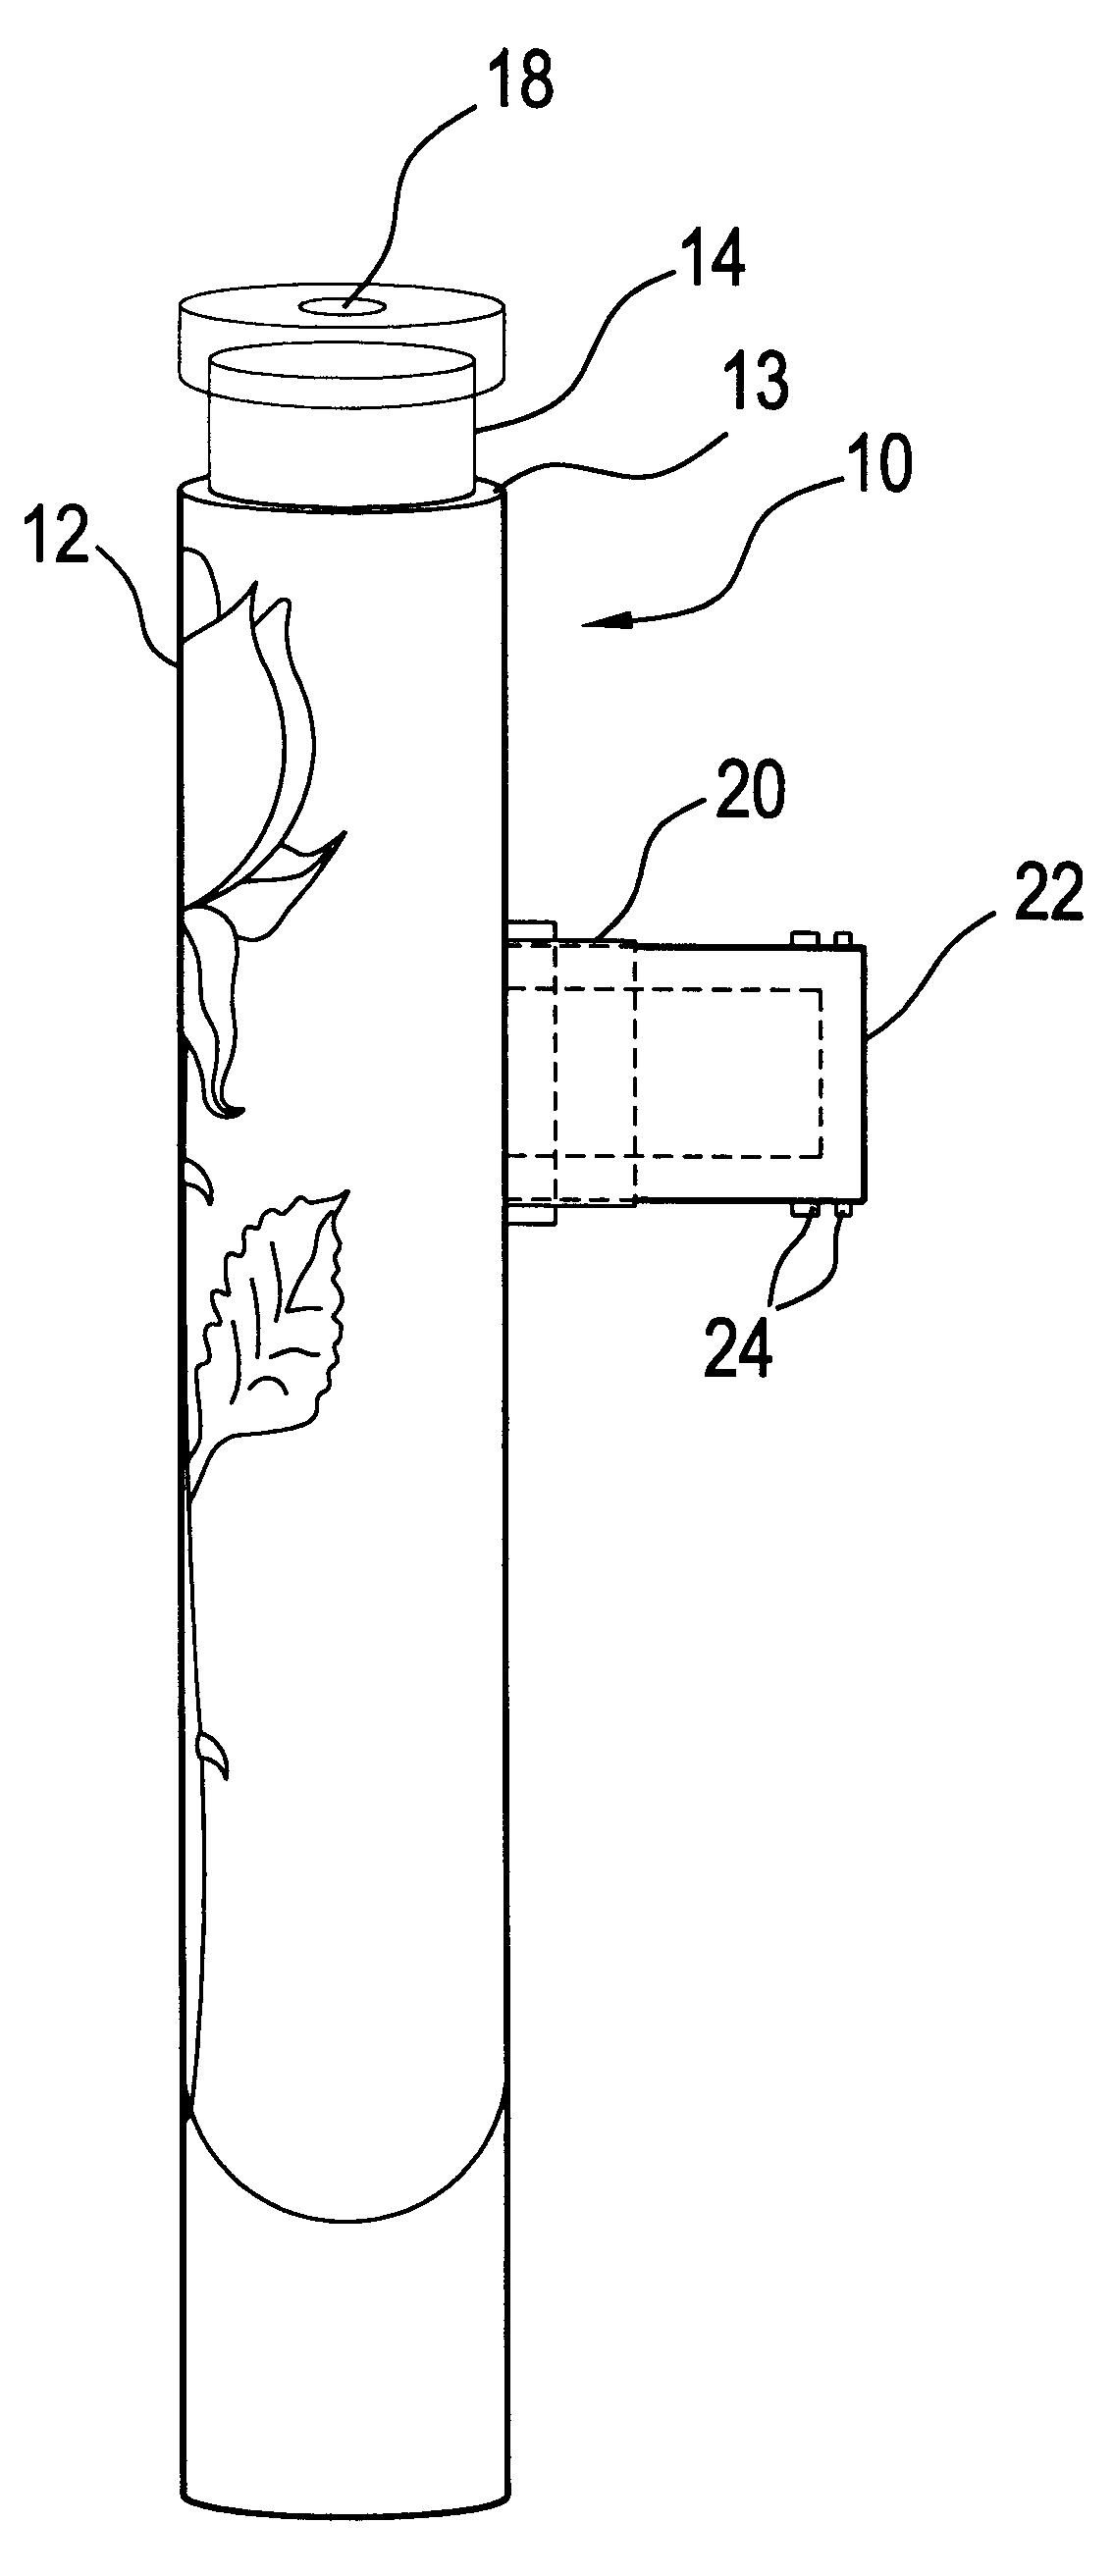 Support structure for attachment to automotive cigarette lighter receptacle